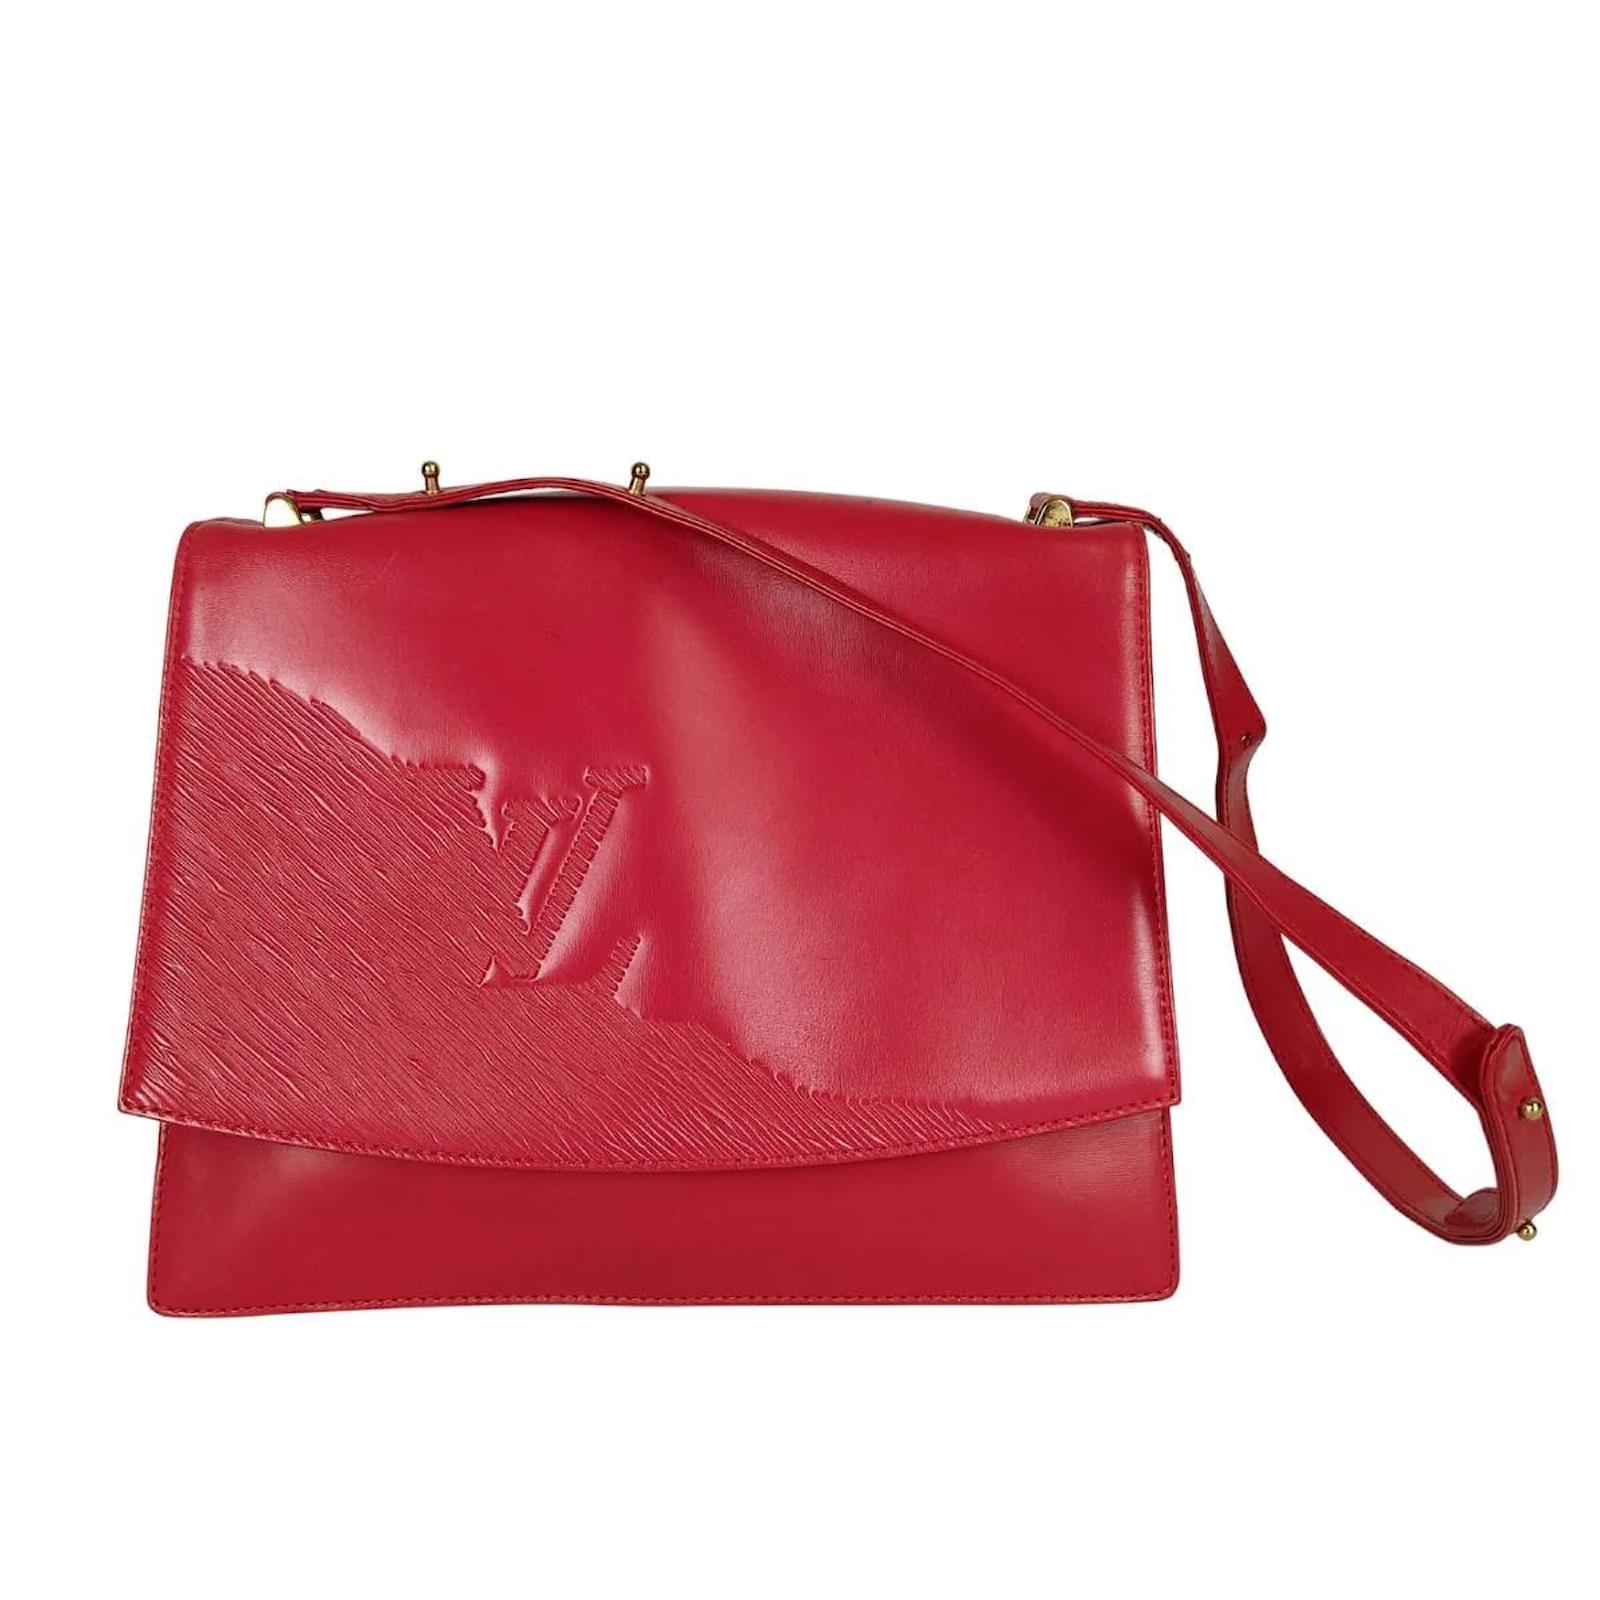 Louis Vuitton Louis Vuitton Opera shoulder bag in red leather ref